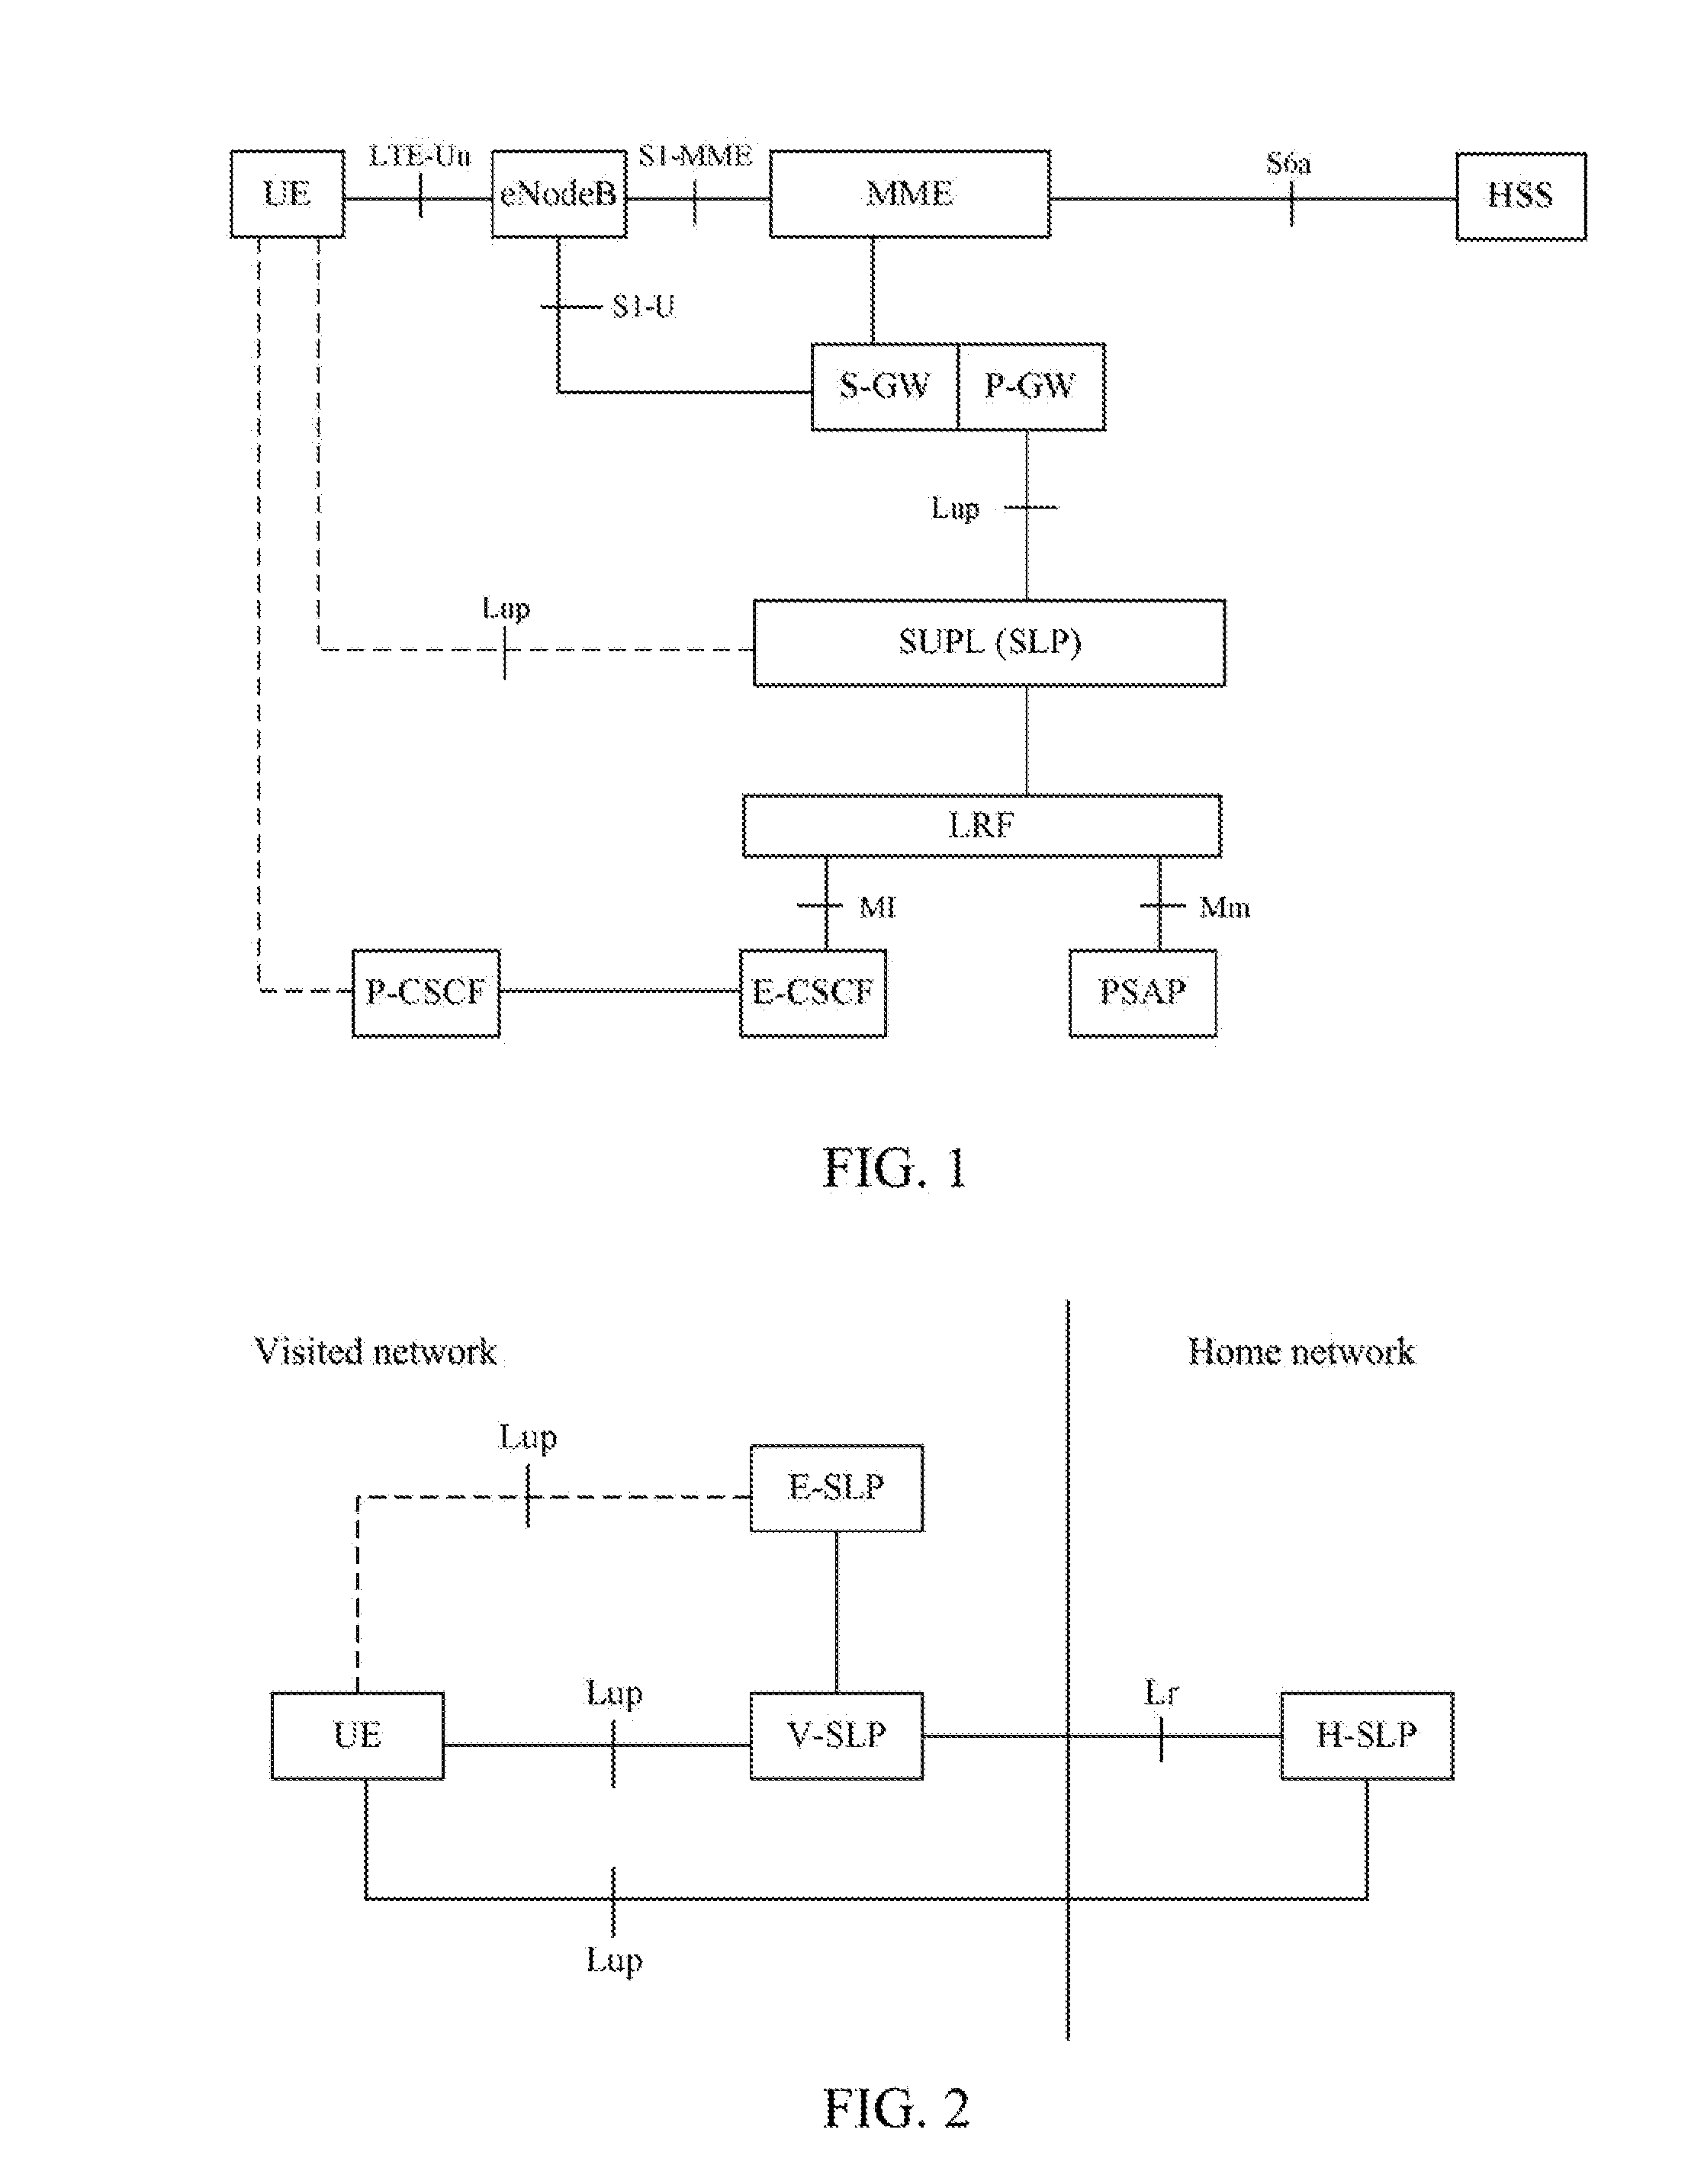 Method and System for Implementing Emergency Location